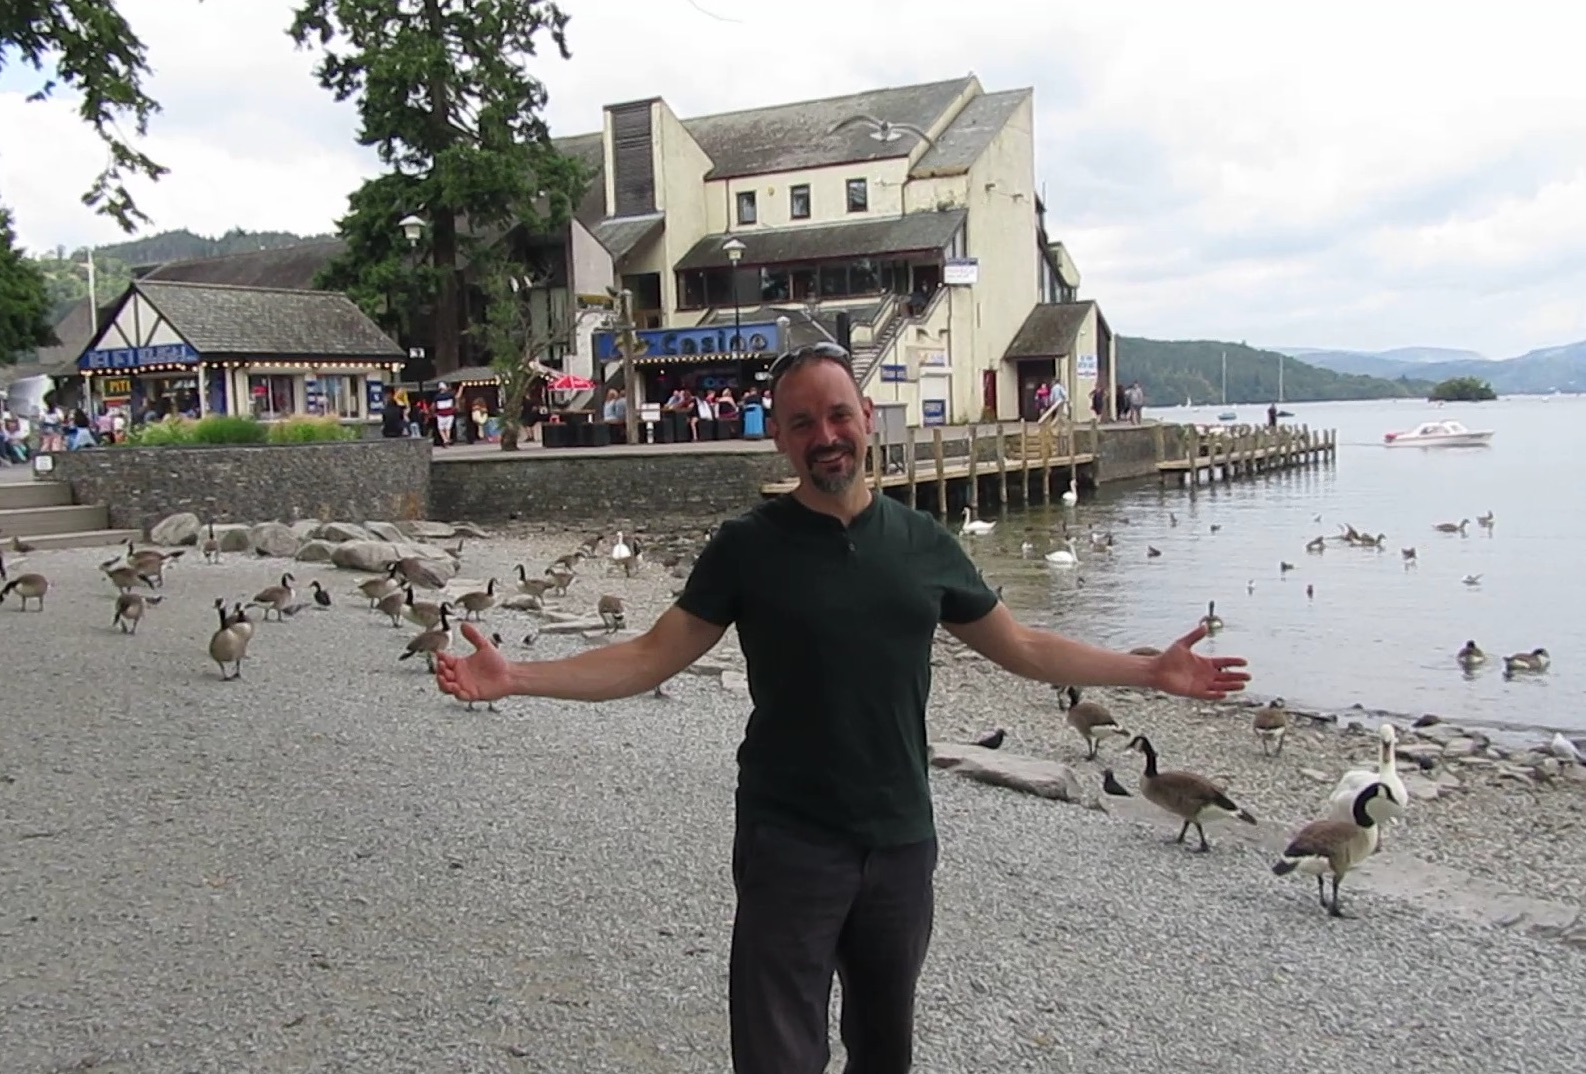 The happiness of Sifu Tim Franklin in Windermere can be easily felt